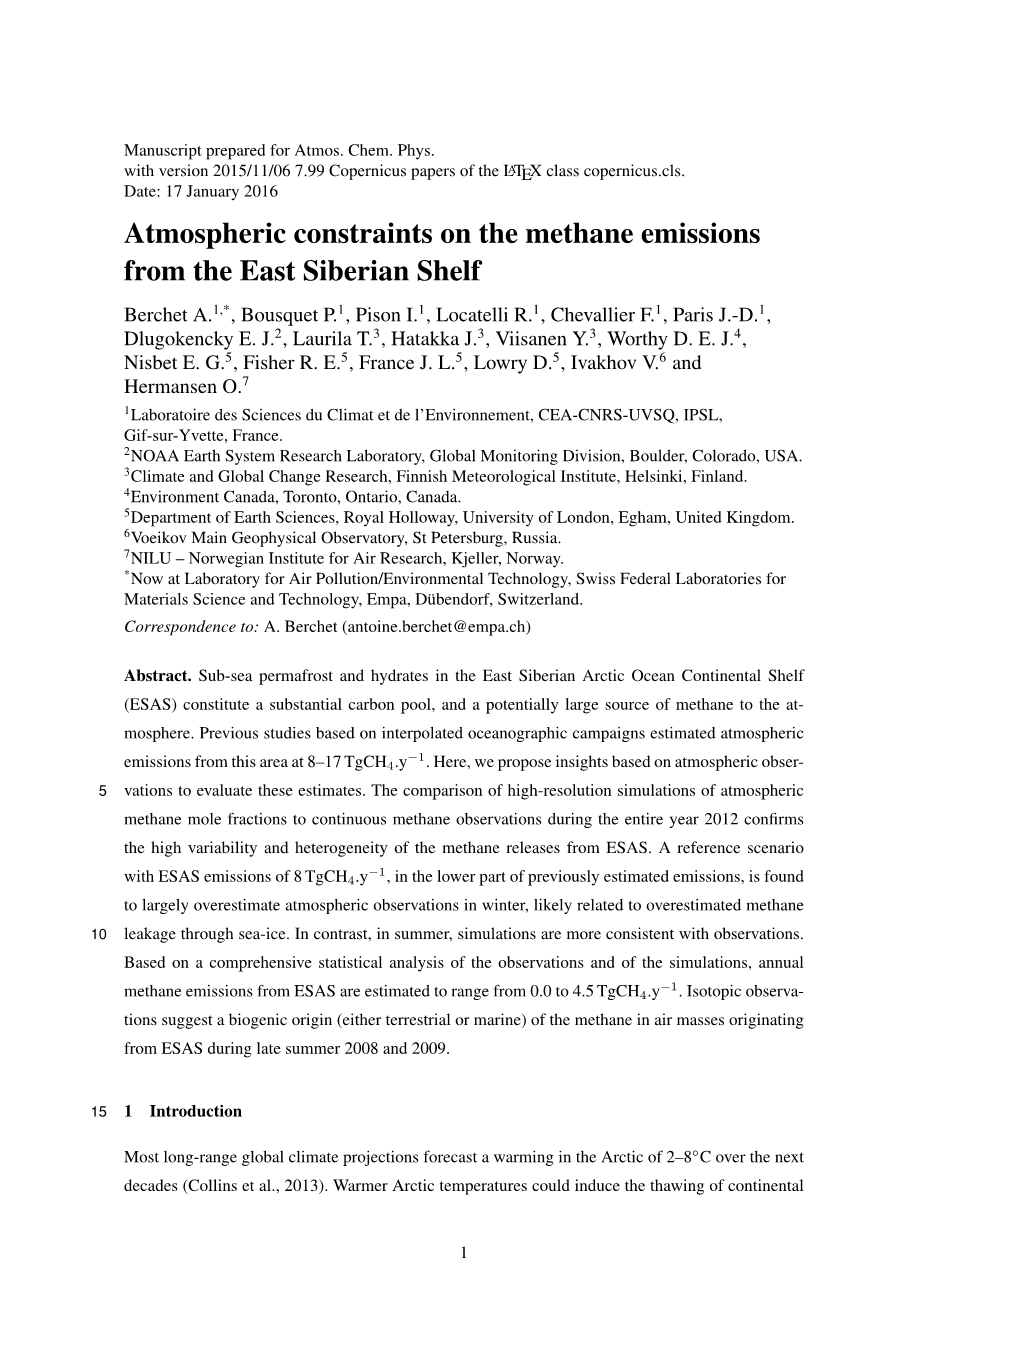 Atmospheric Constraints on the Methane Emissions from the East